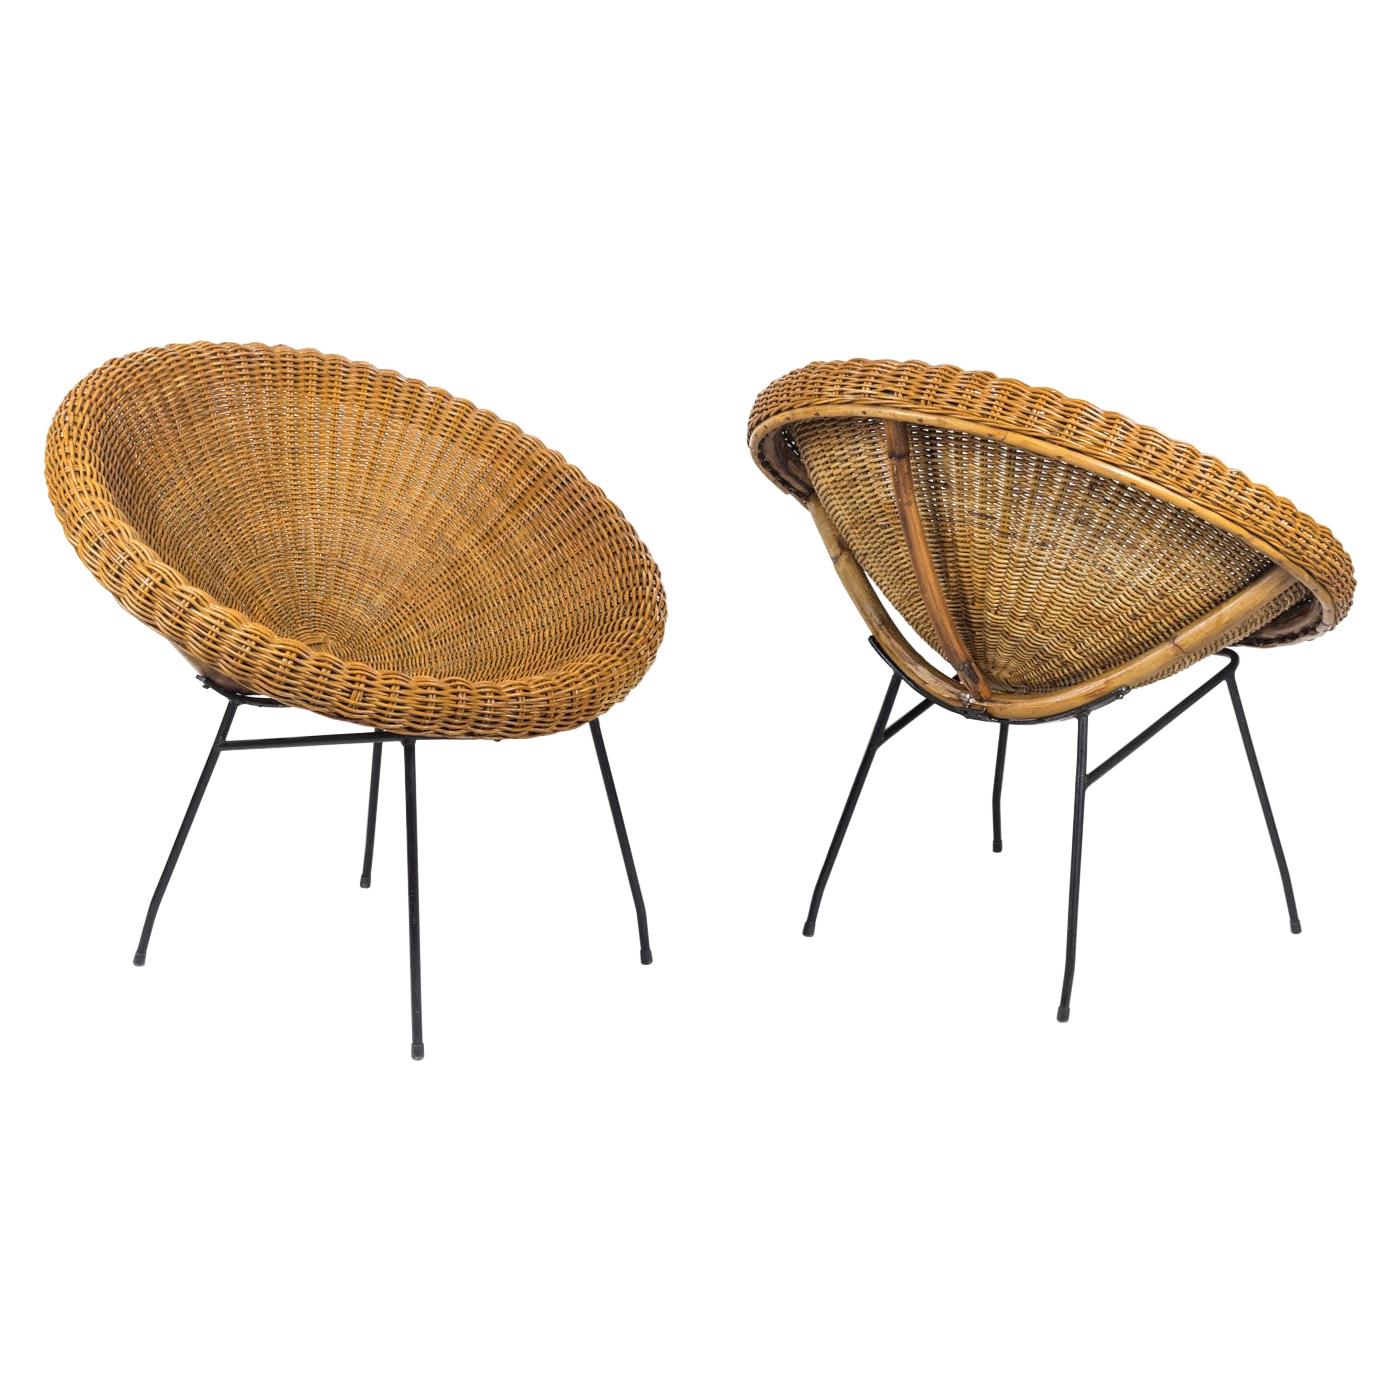 Pair of Sun Chairs in Wicker and Black Metal, 1950s